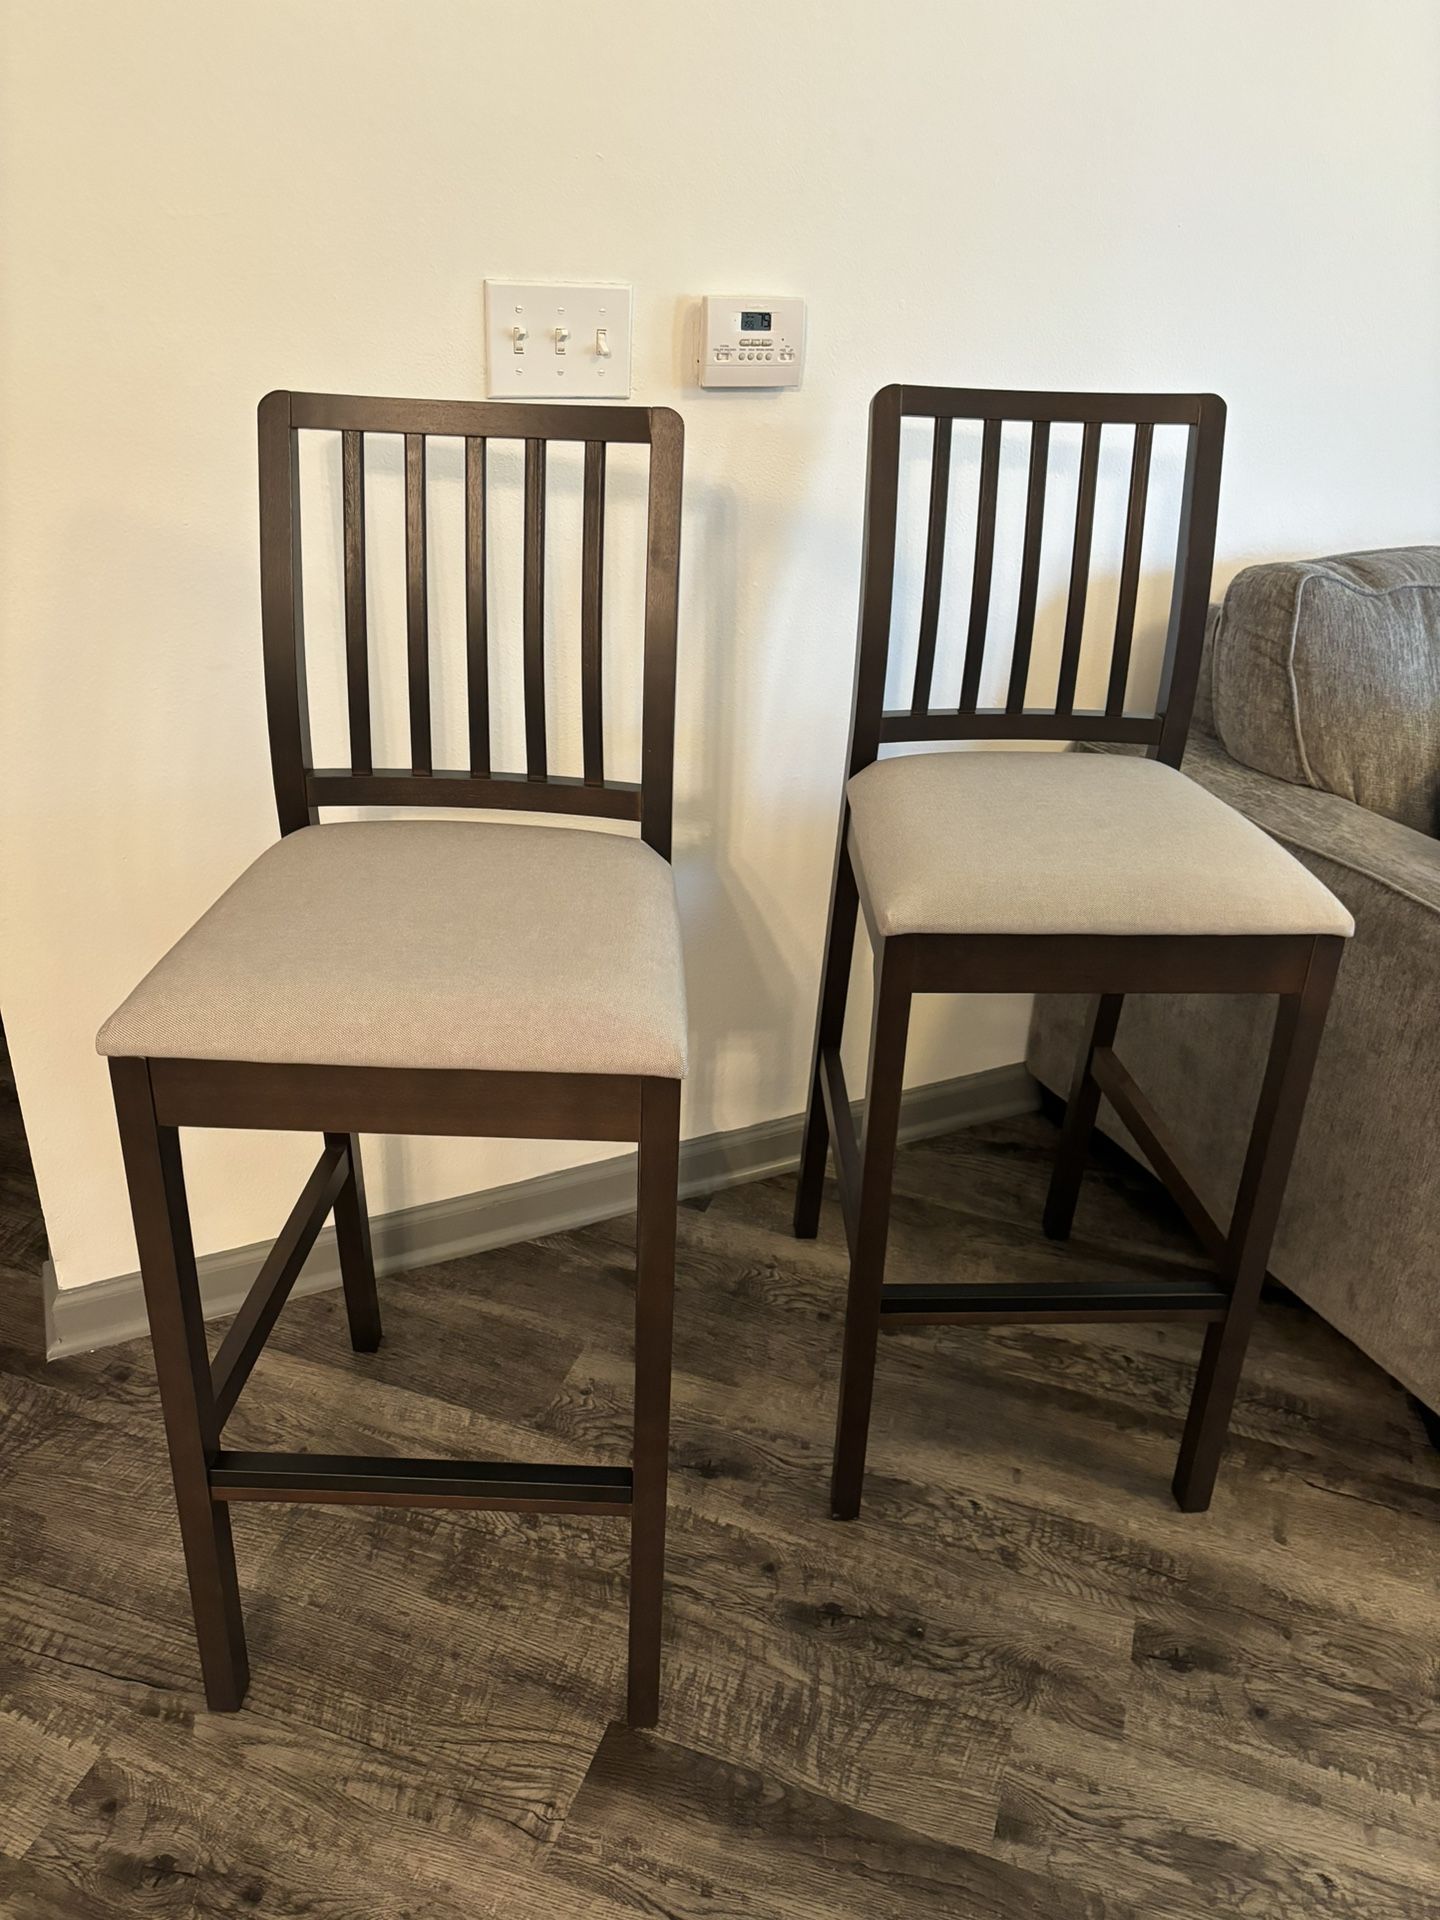 2 Bar Stools In A Great Condition 